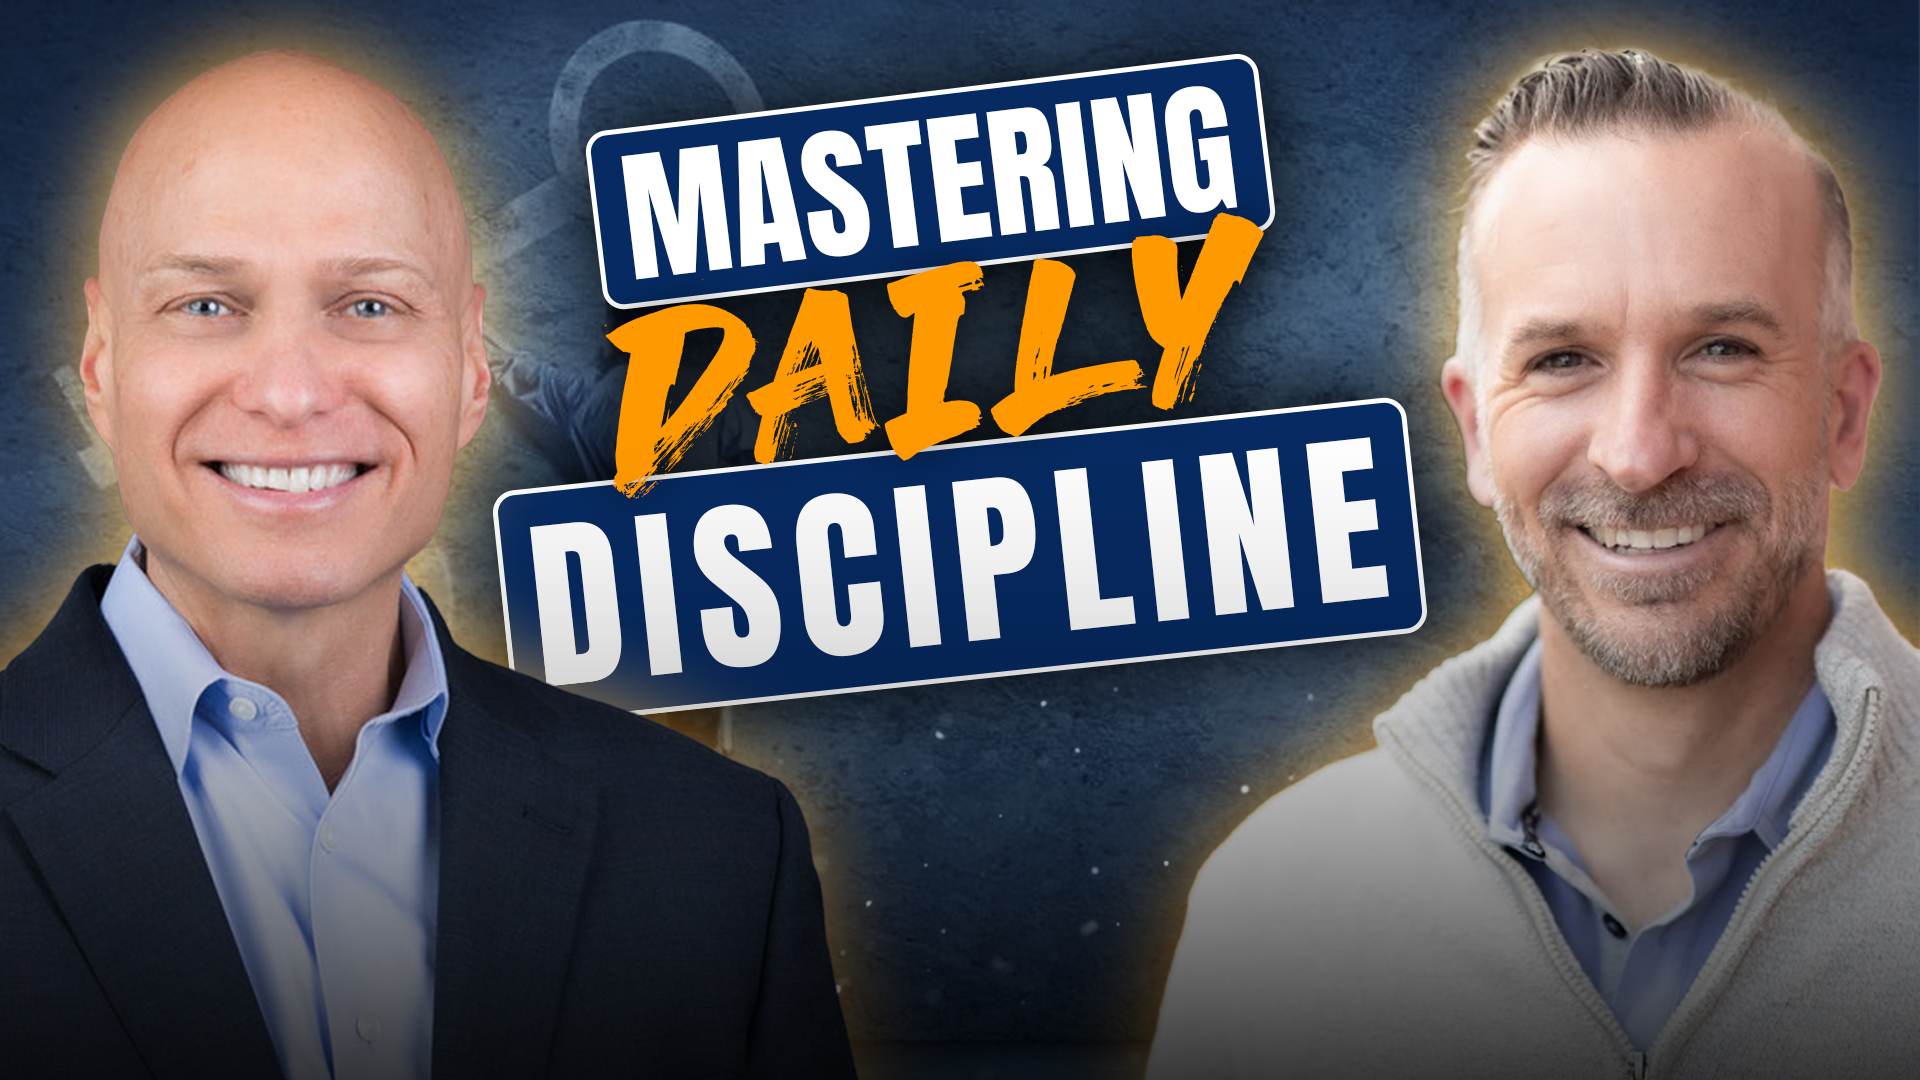 Flow Over Fear: Mastering Daily Discipline